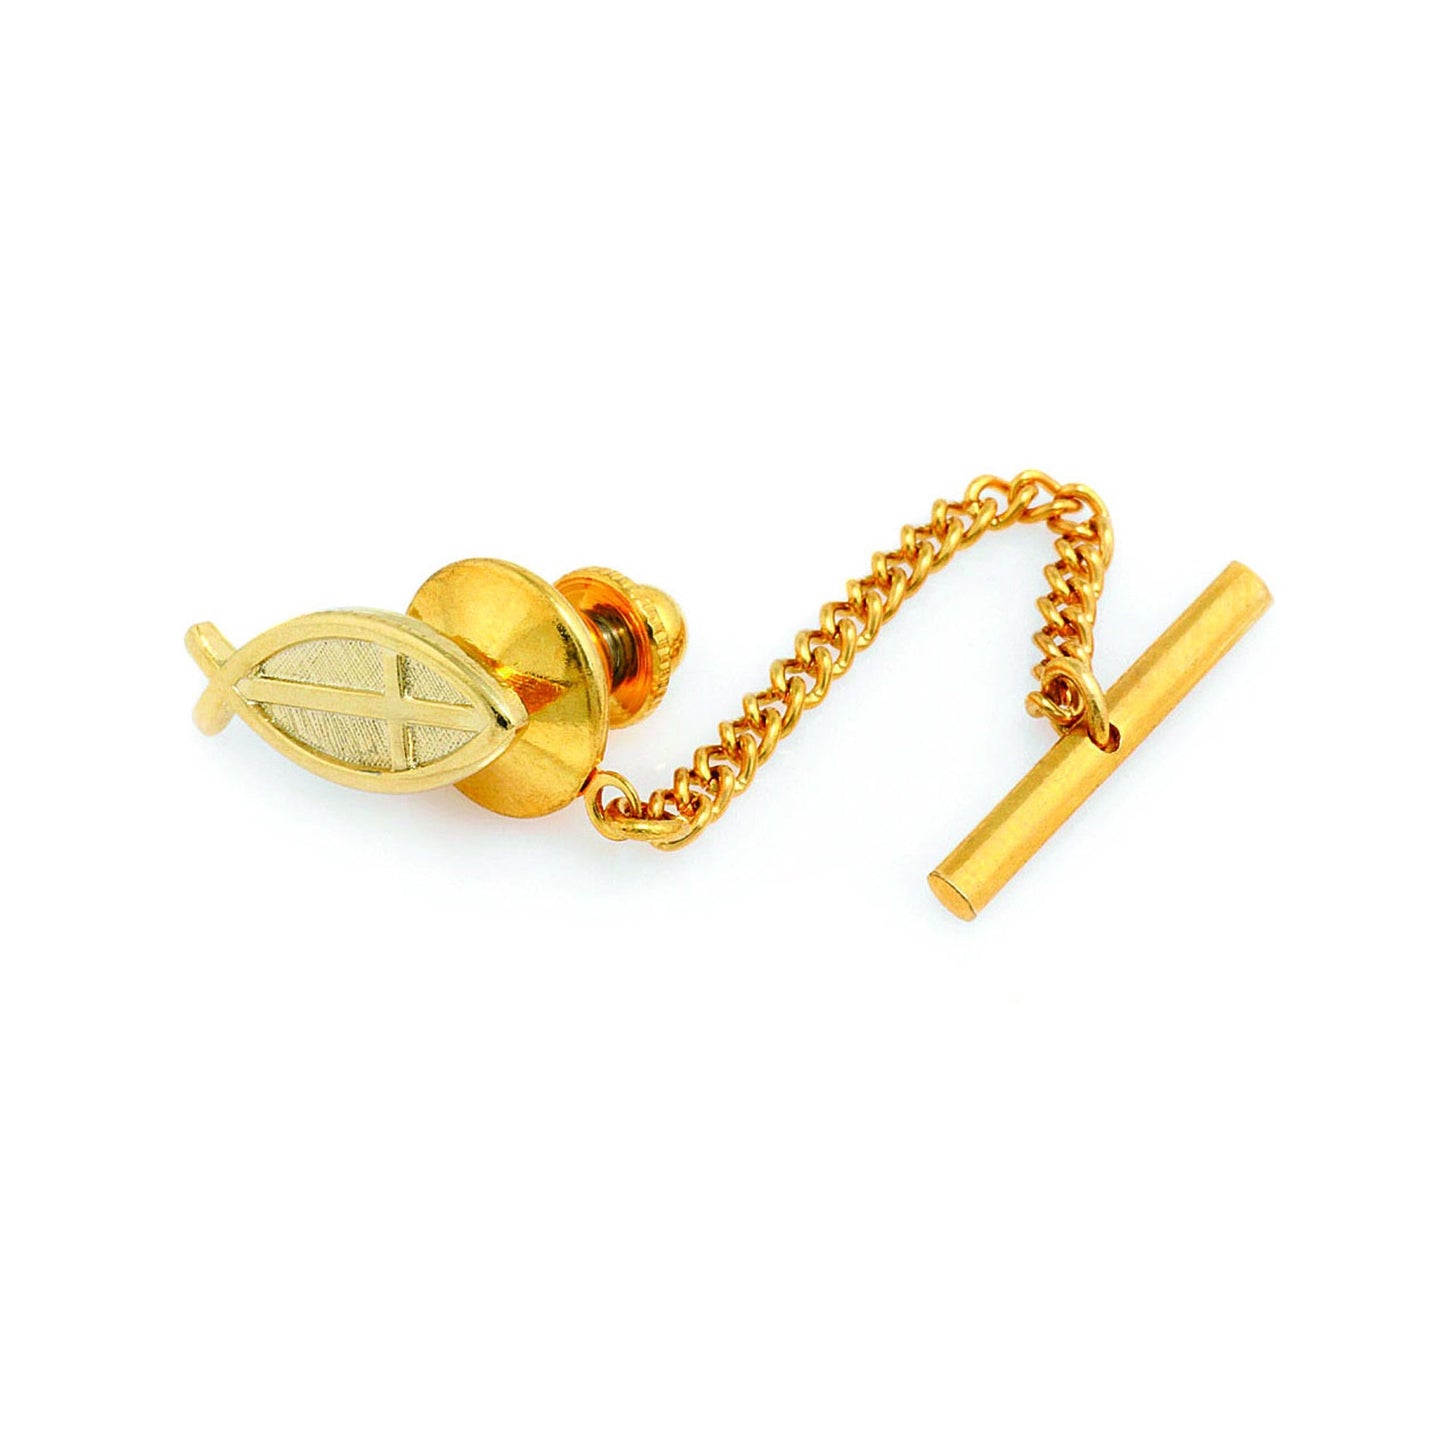 Christian Fish and Cross Gold Tie Tack